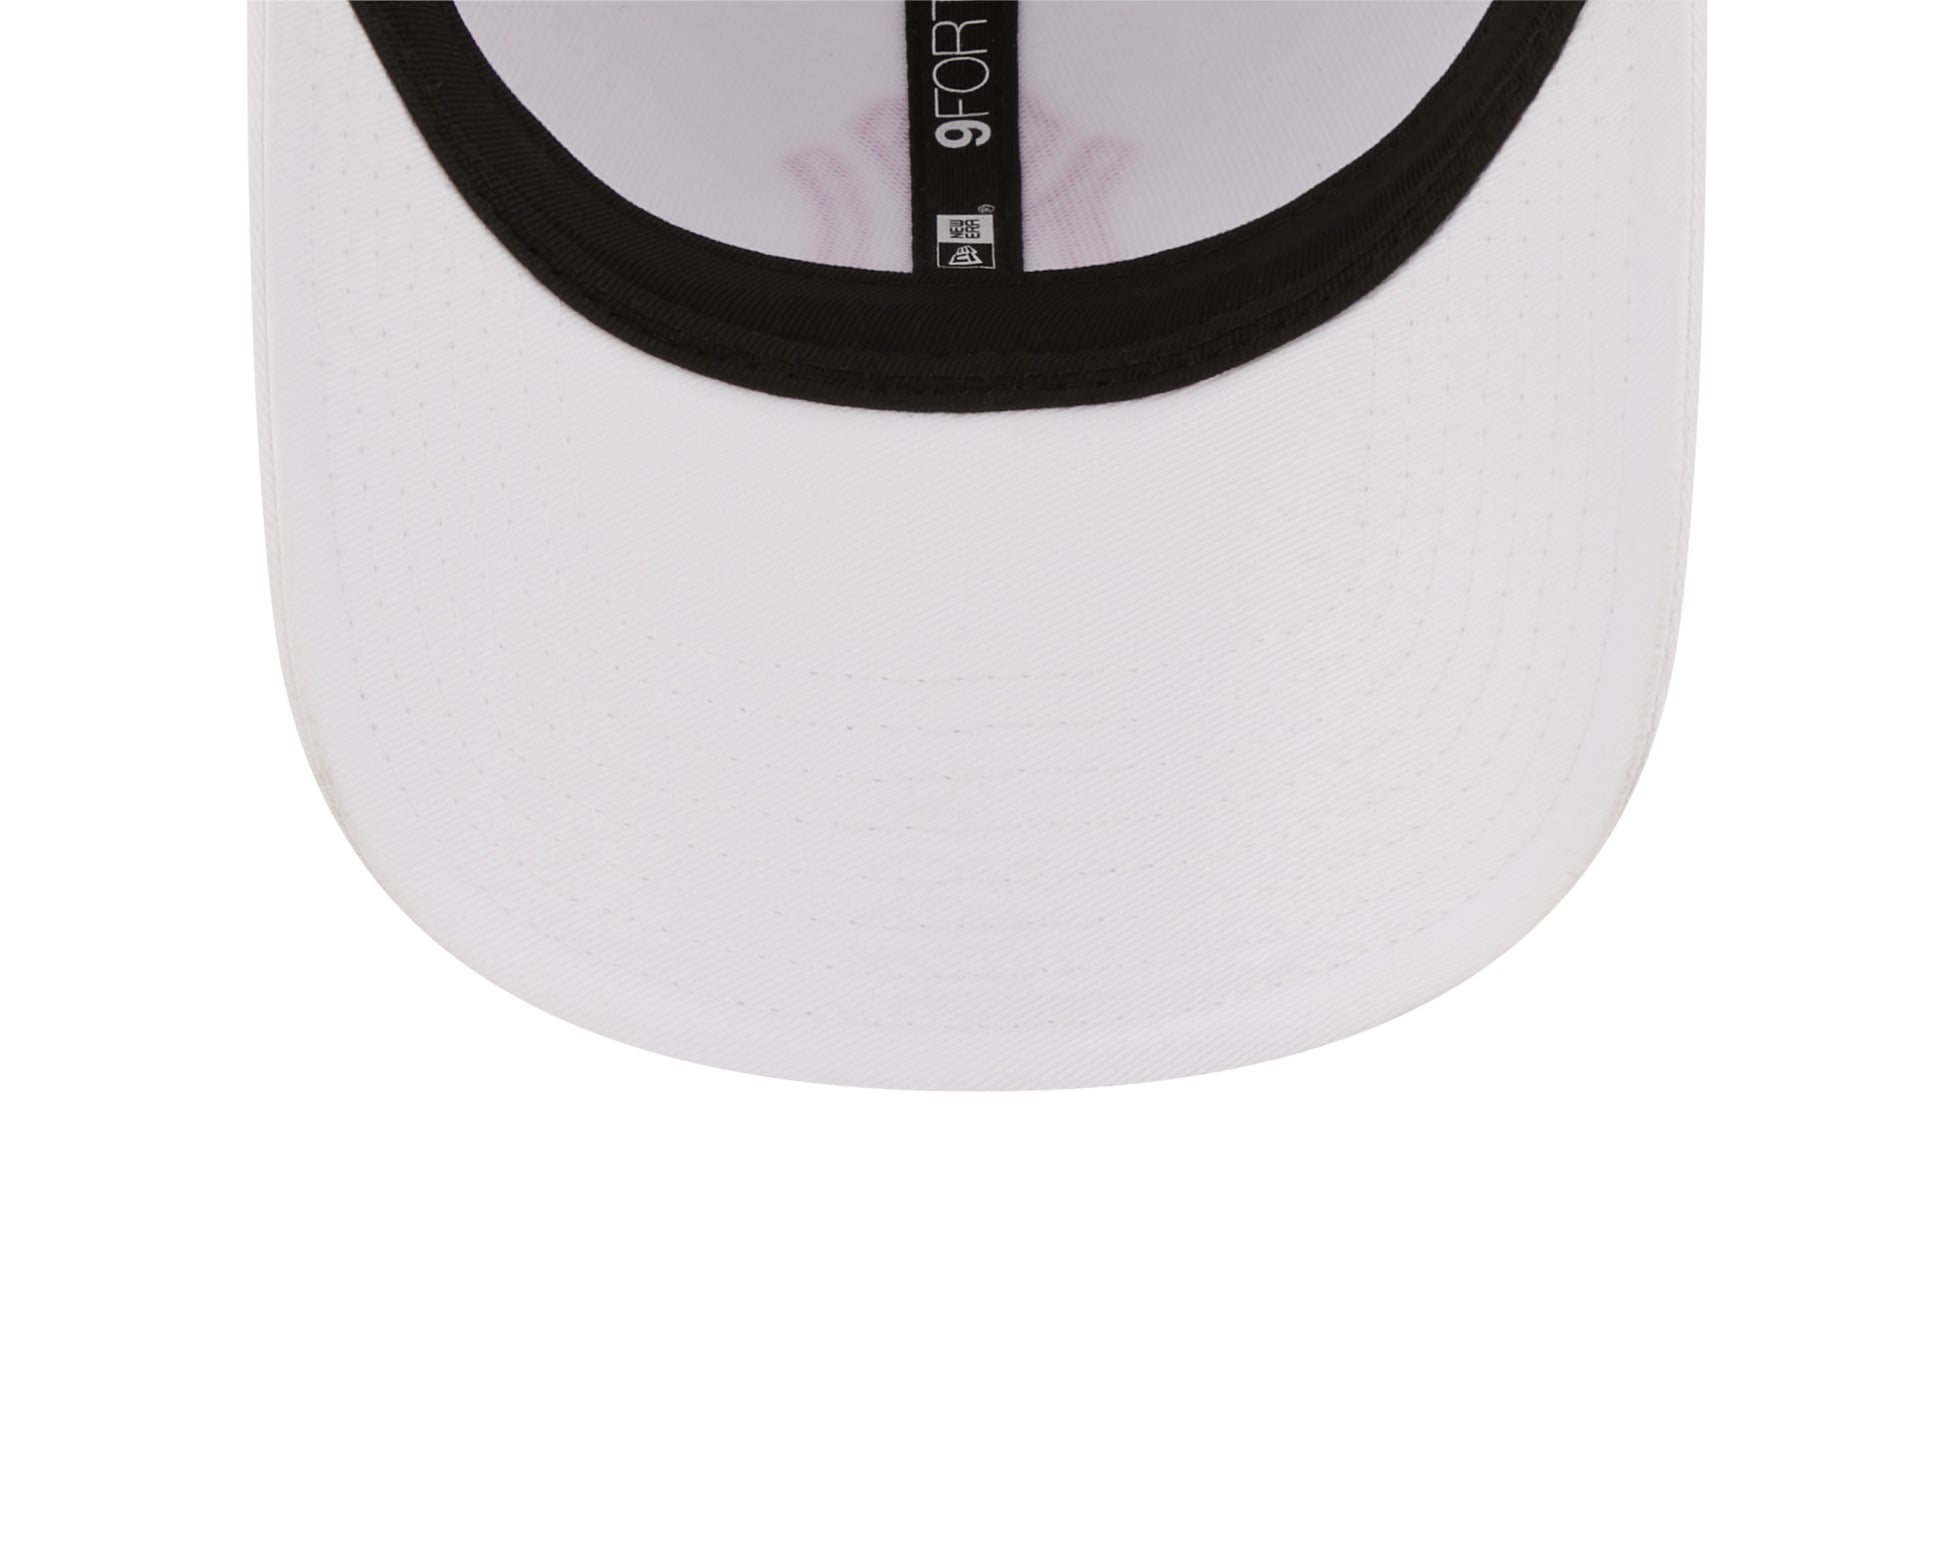 New York Yankees Essential 9Forty - White/Rose - Headz Up 